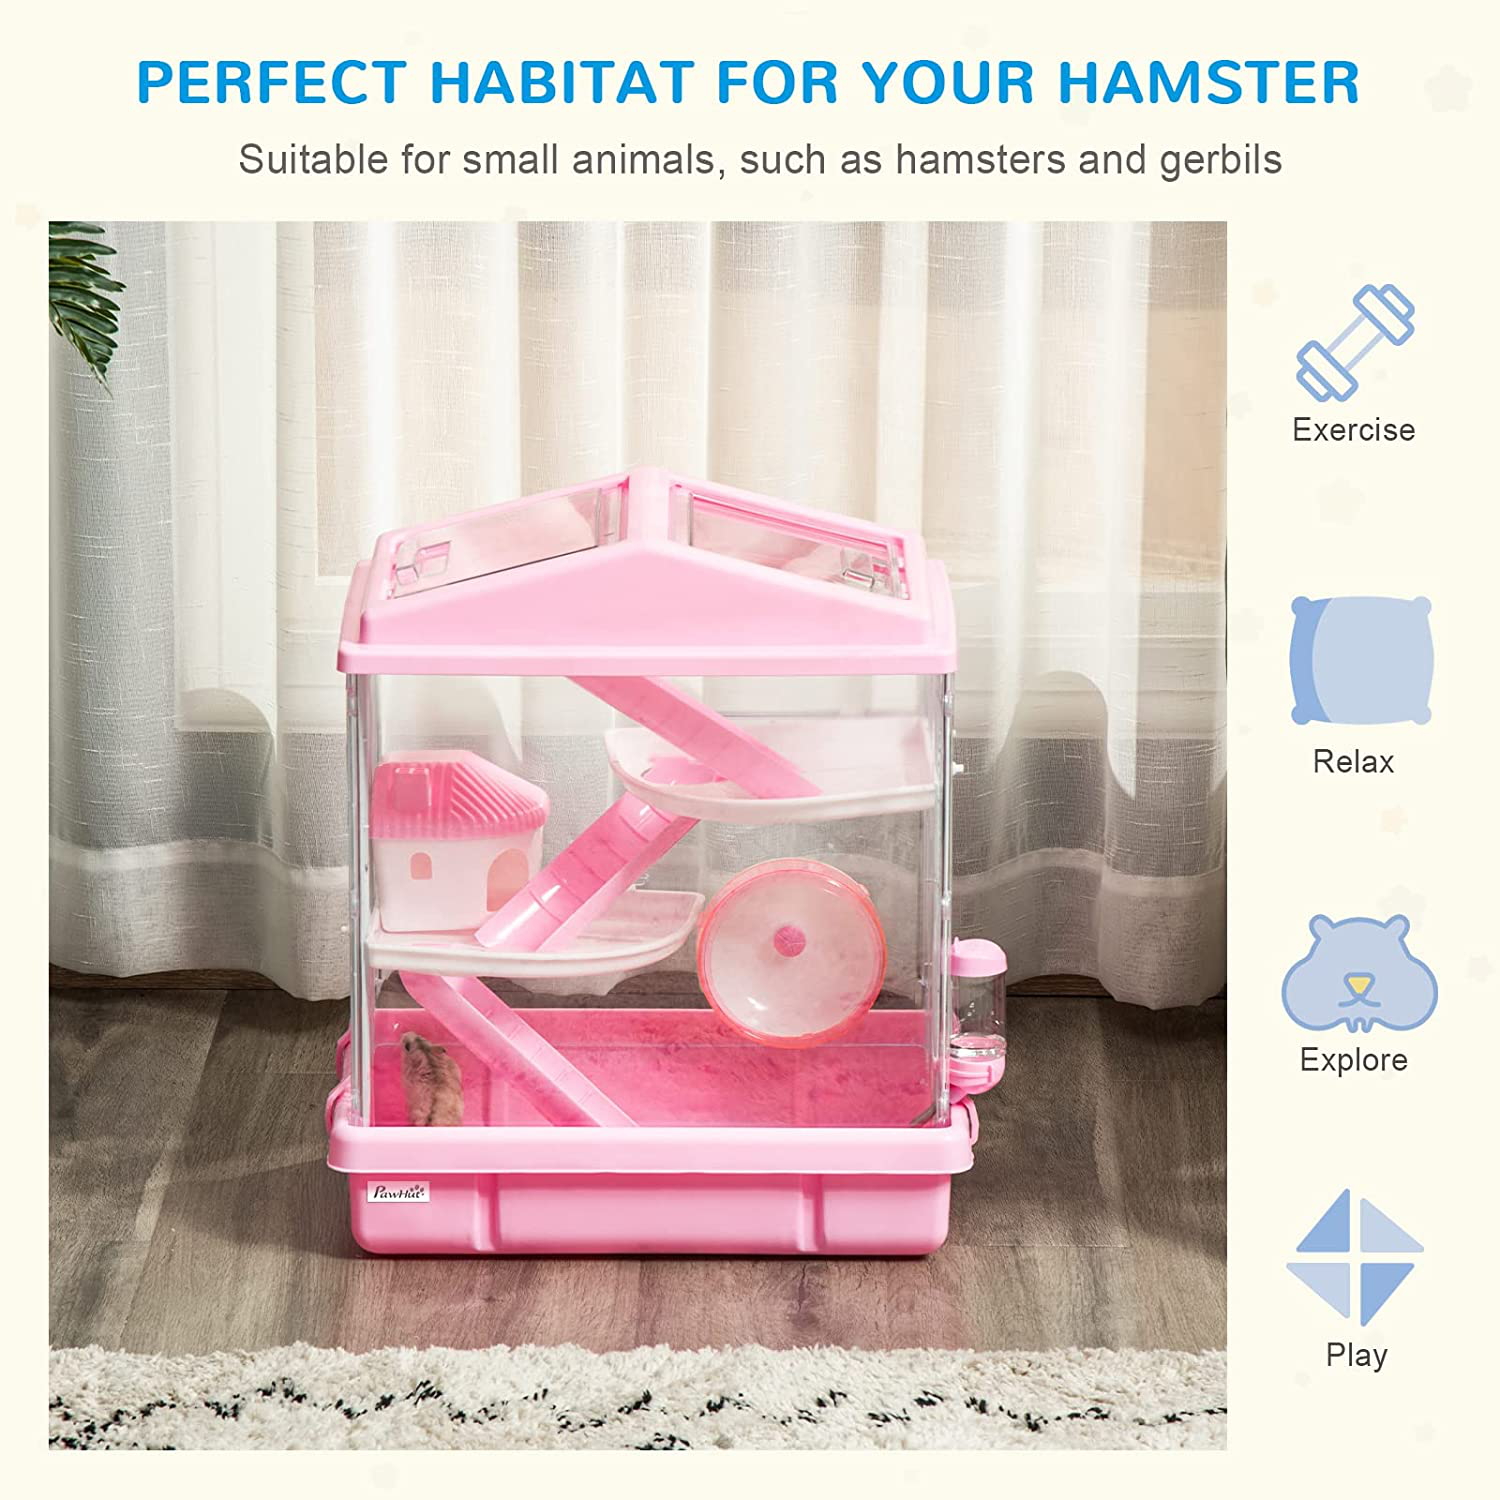 Pawhut Multi-Tier Hamster Cage, Animal Enclosure Starter Kit for Small Pets, Ventilated Steel Wire and Plastic with Exercise Wheel, Food Dish, Water Bottle, Pink